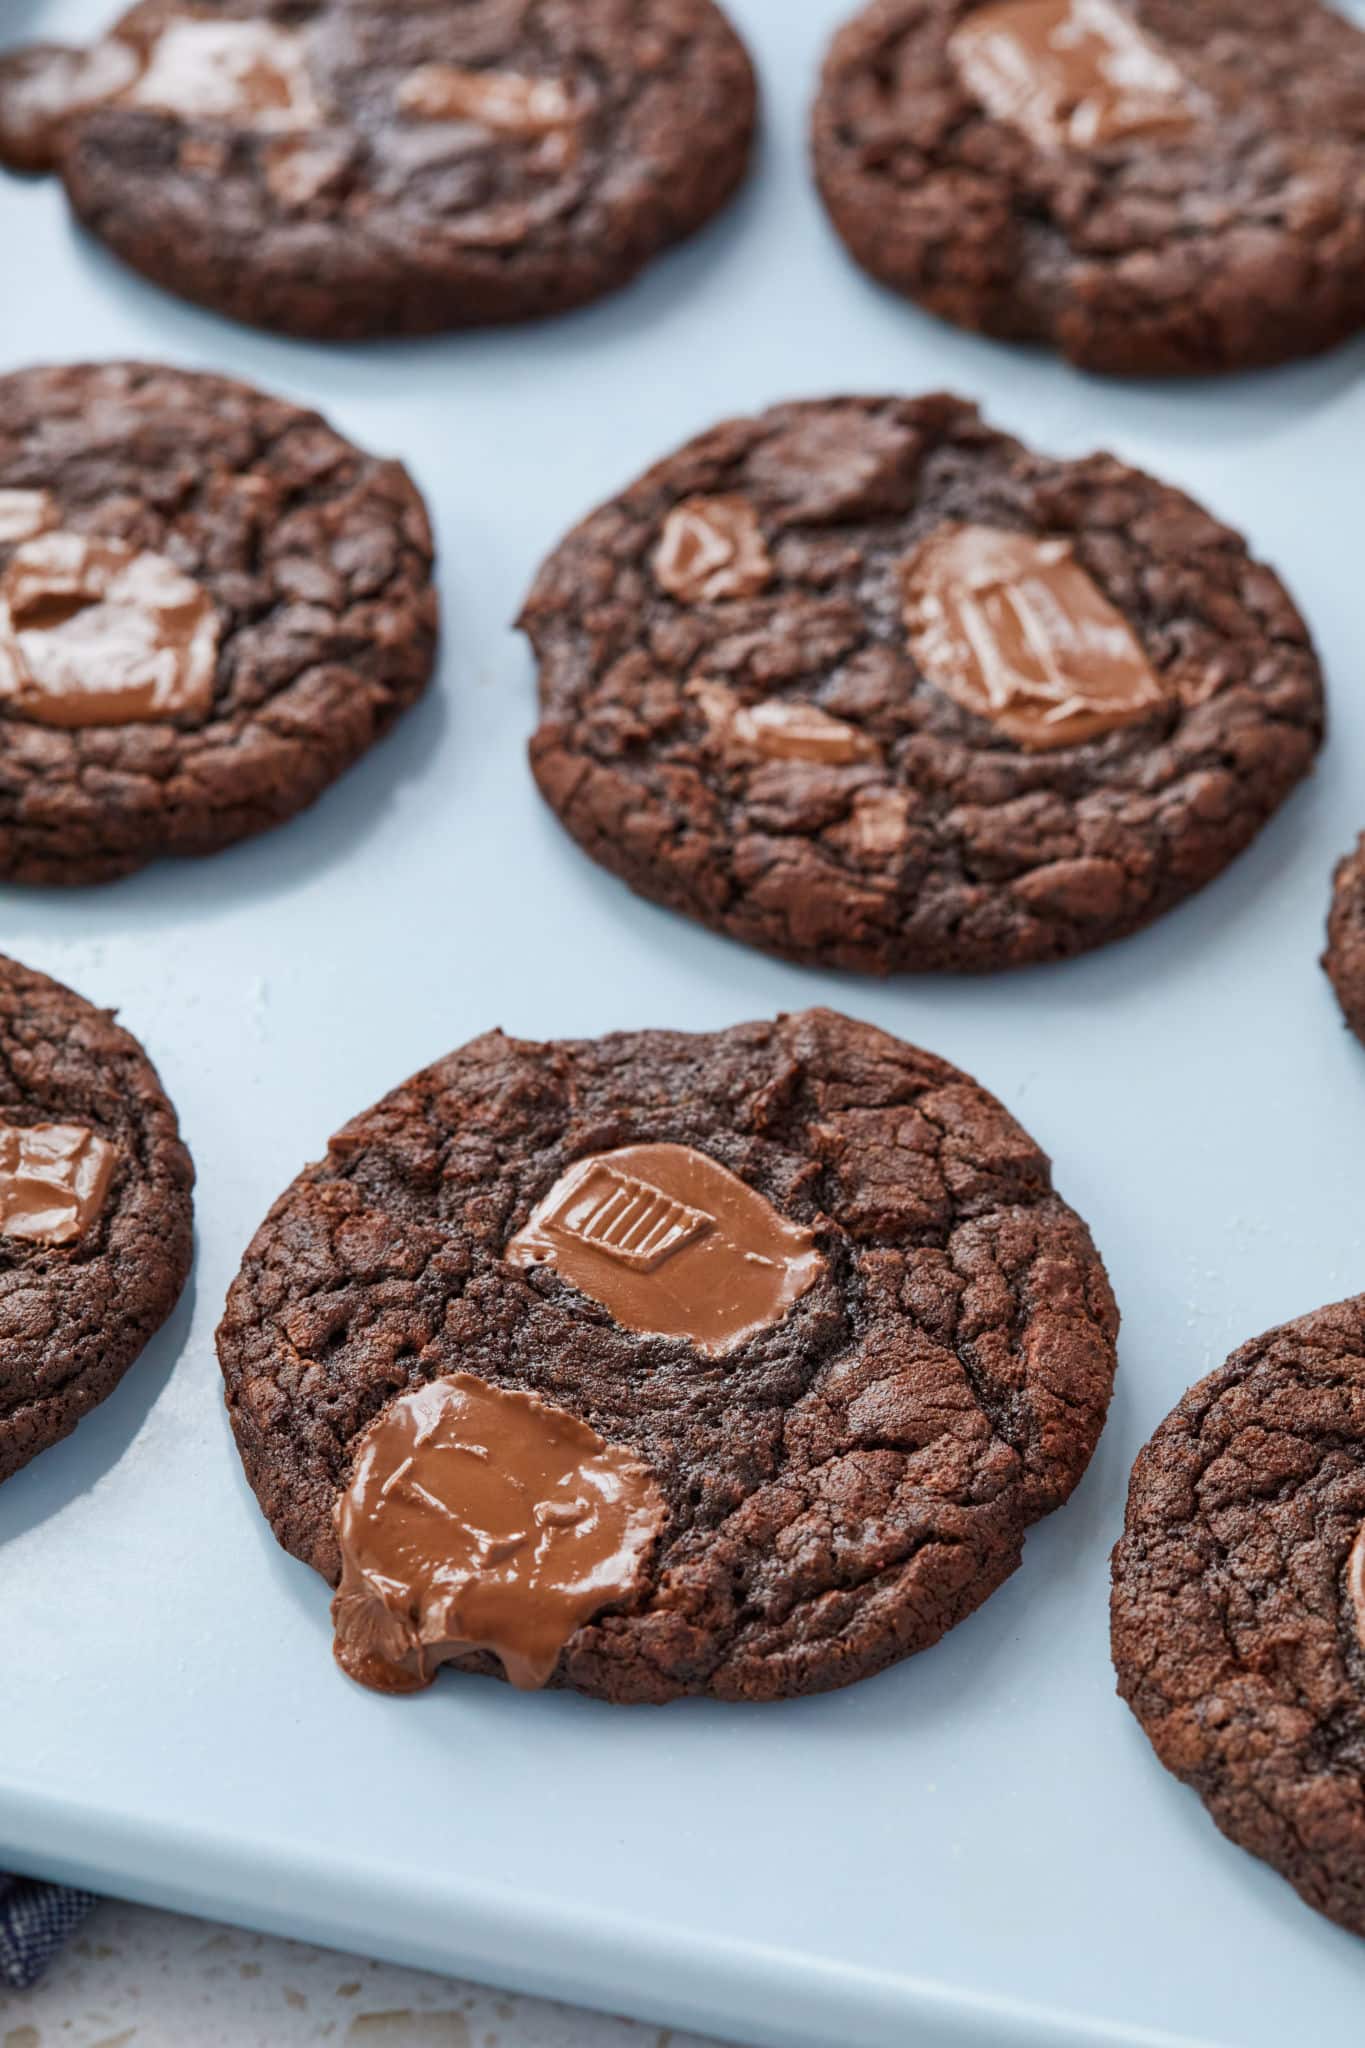 Melting chocolate in a cookie.